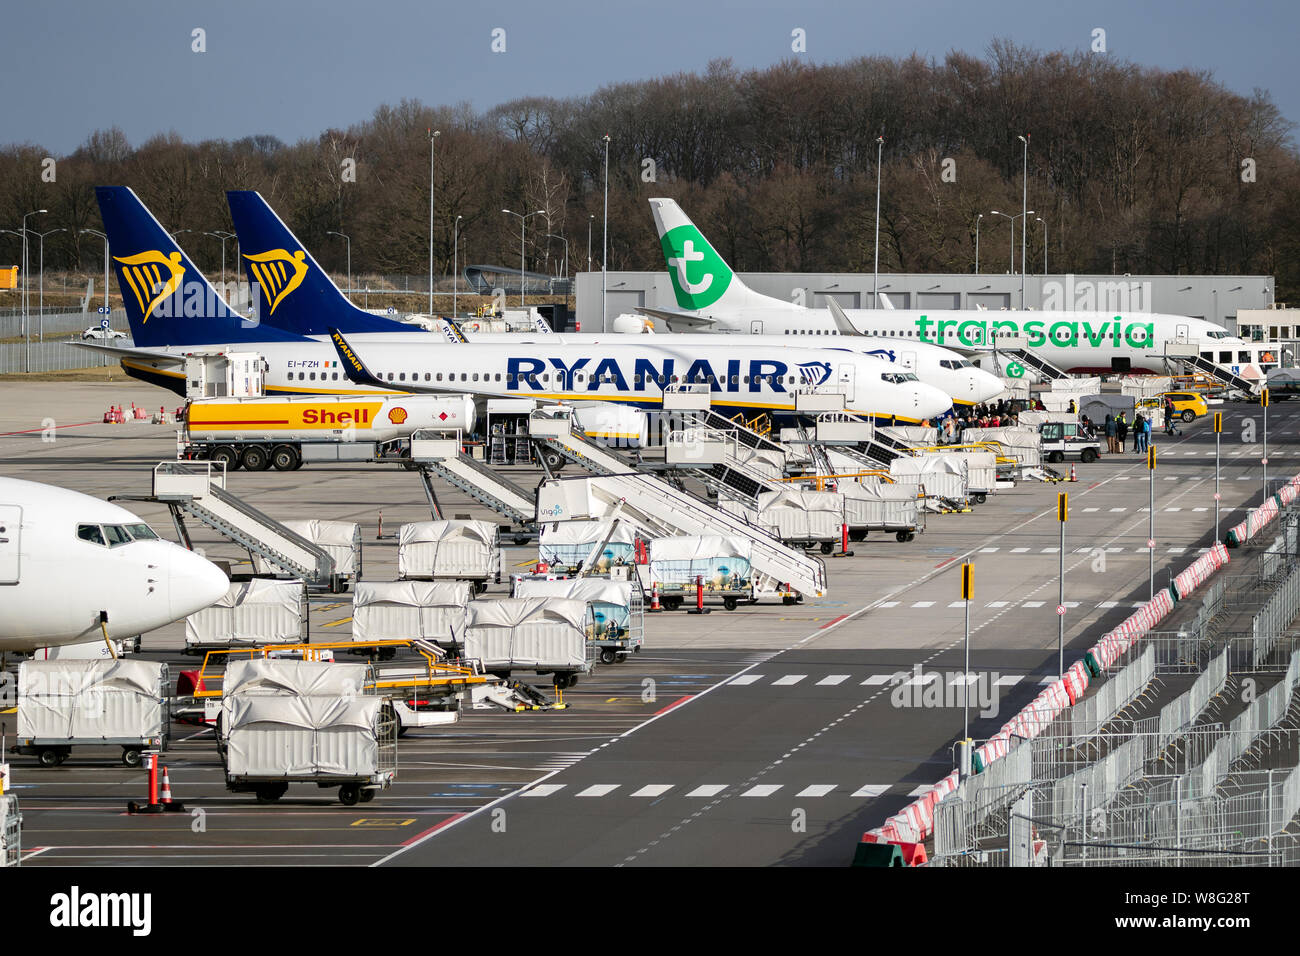 EINDHOVEN, THE NETHERLANDS - FEB 9, 2019: Low-budget airlines Ryanair and Transavia aircraft parked at the terminal of Eindhoven Airport. Stock Photo